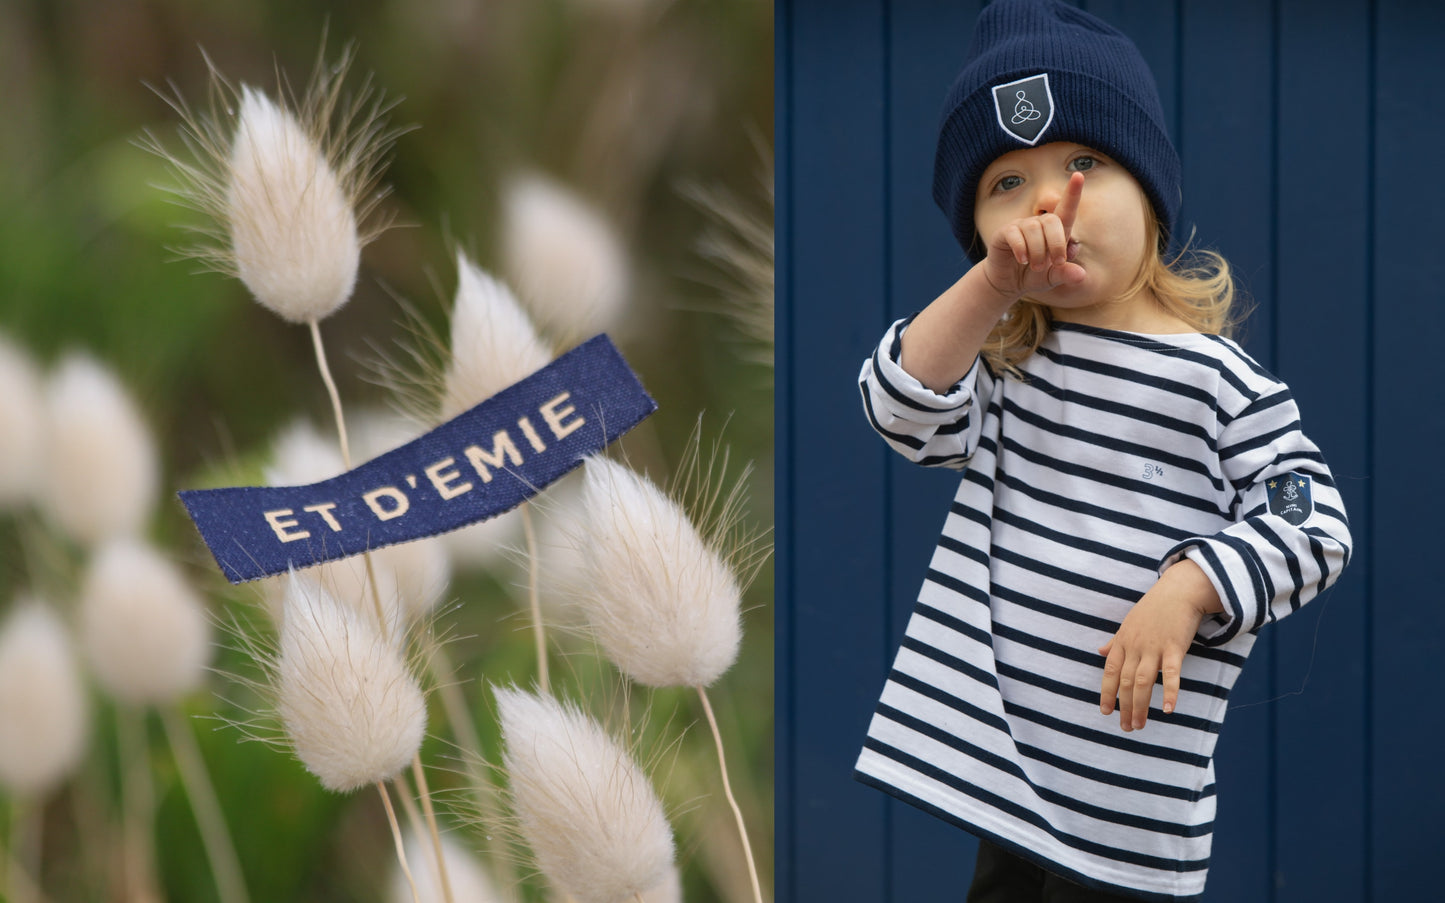 MINI CAPTAIN sailor shirt "I'm 1 and a half years old" embroidered in organic cotton 🇫🇷